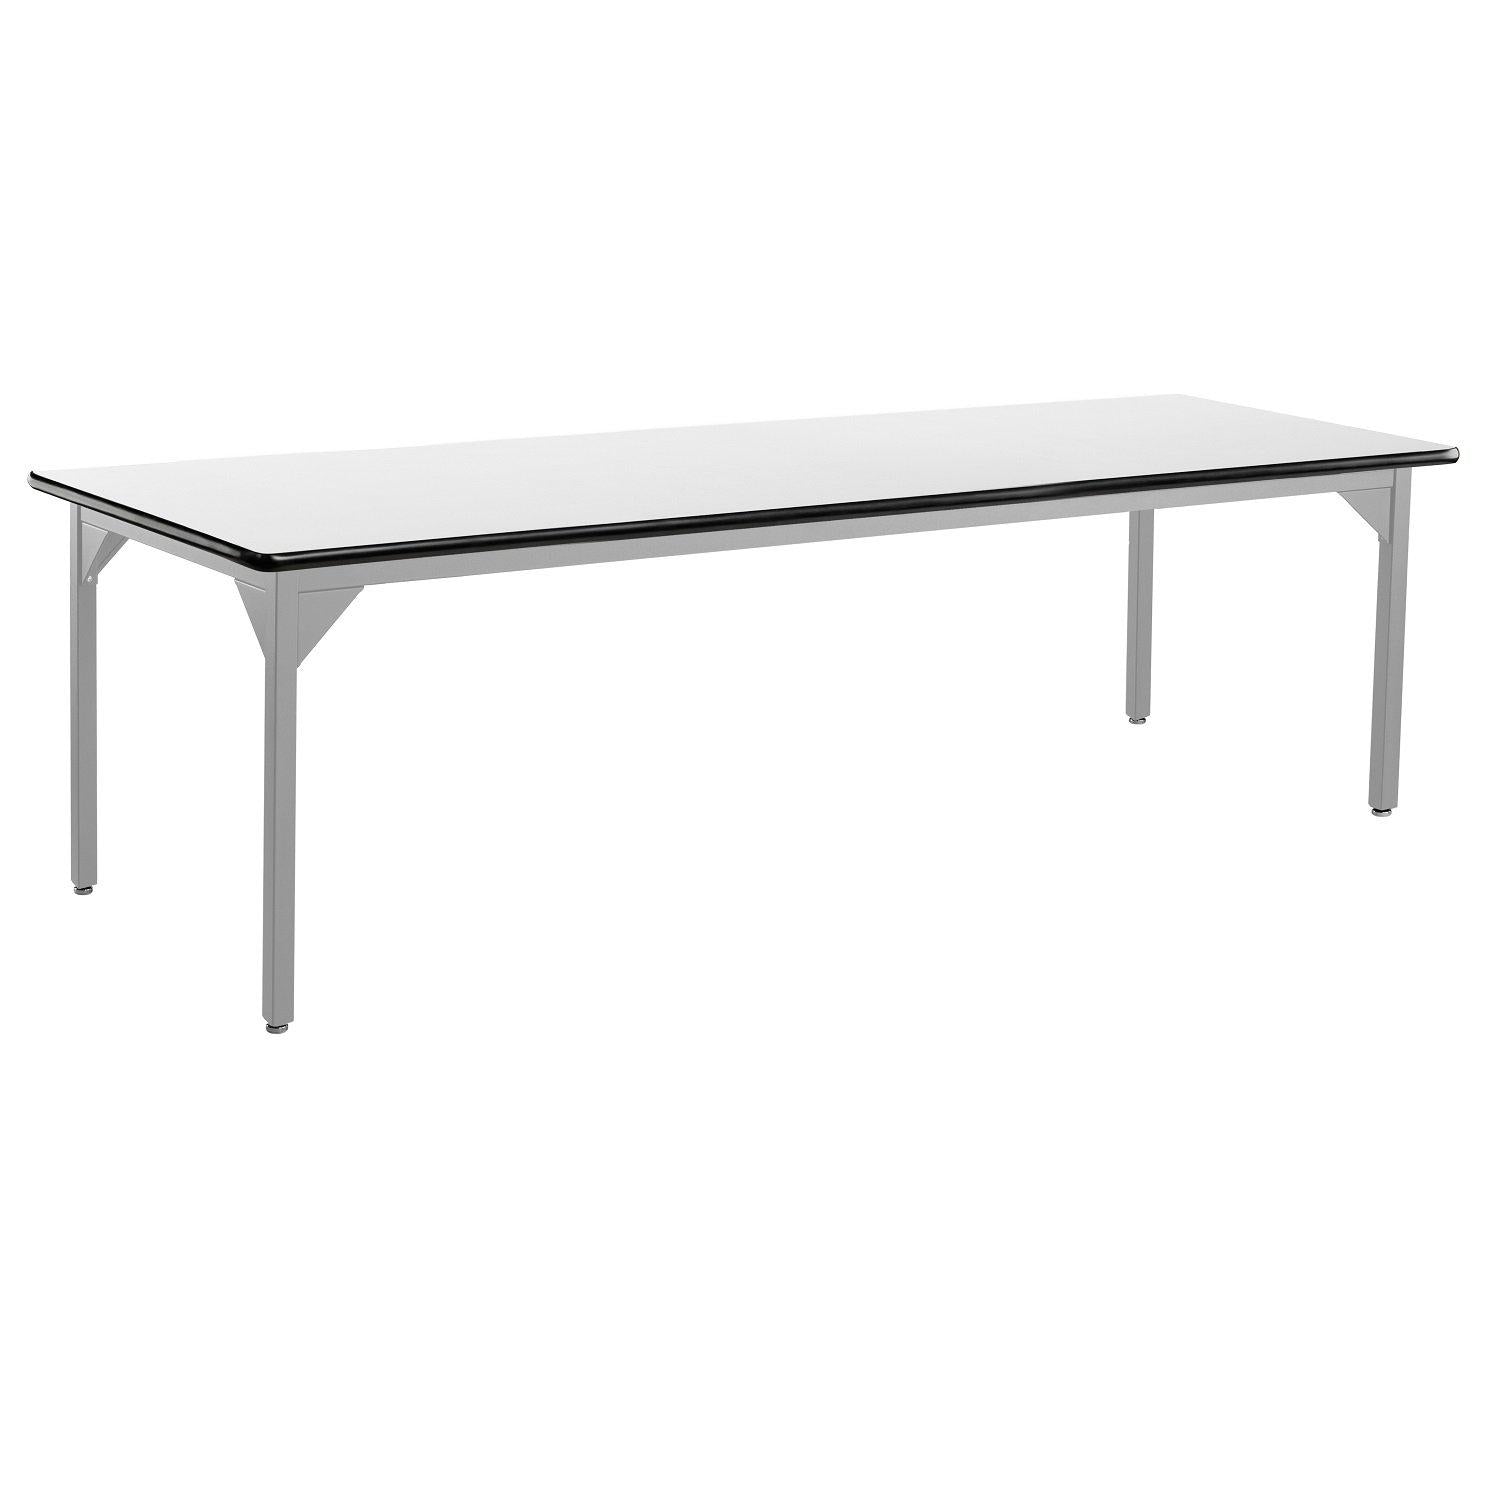 Heavy-Duty Fixed Height Utility Table, Soft Grey Frame, 42" x 72", Whiteboard High-Pressure Laminate Top